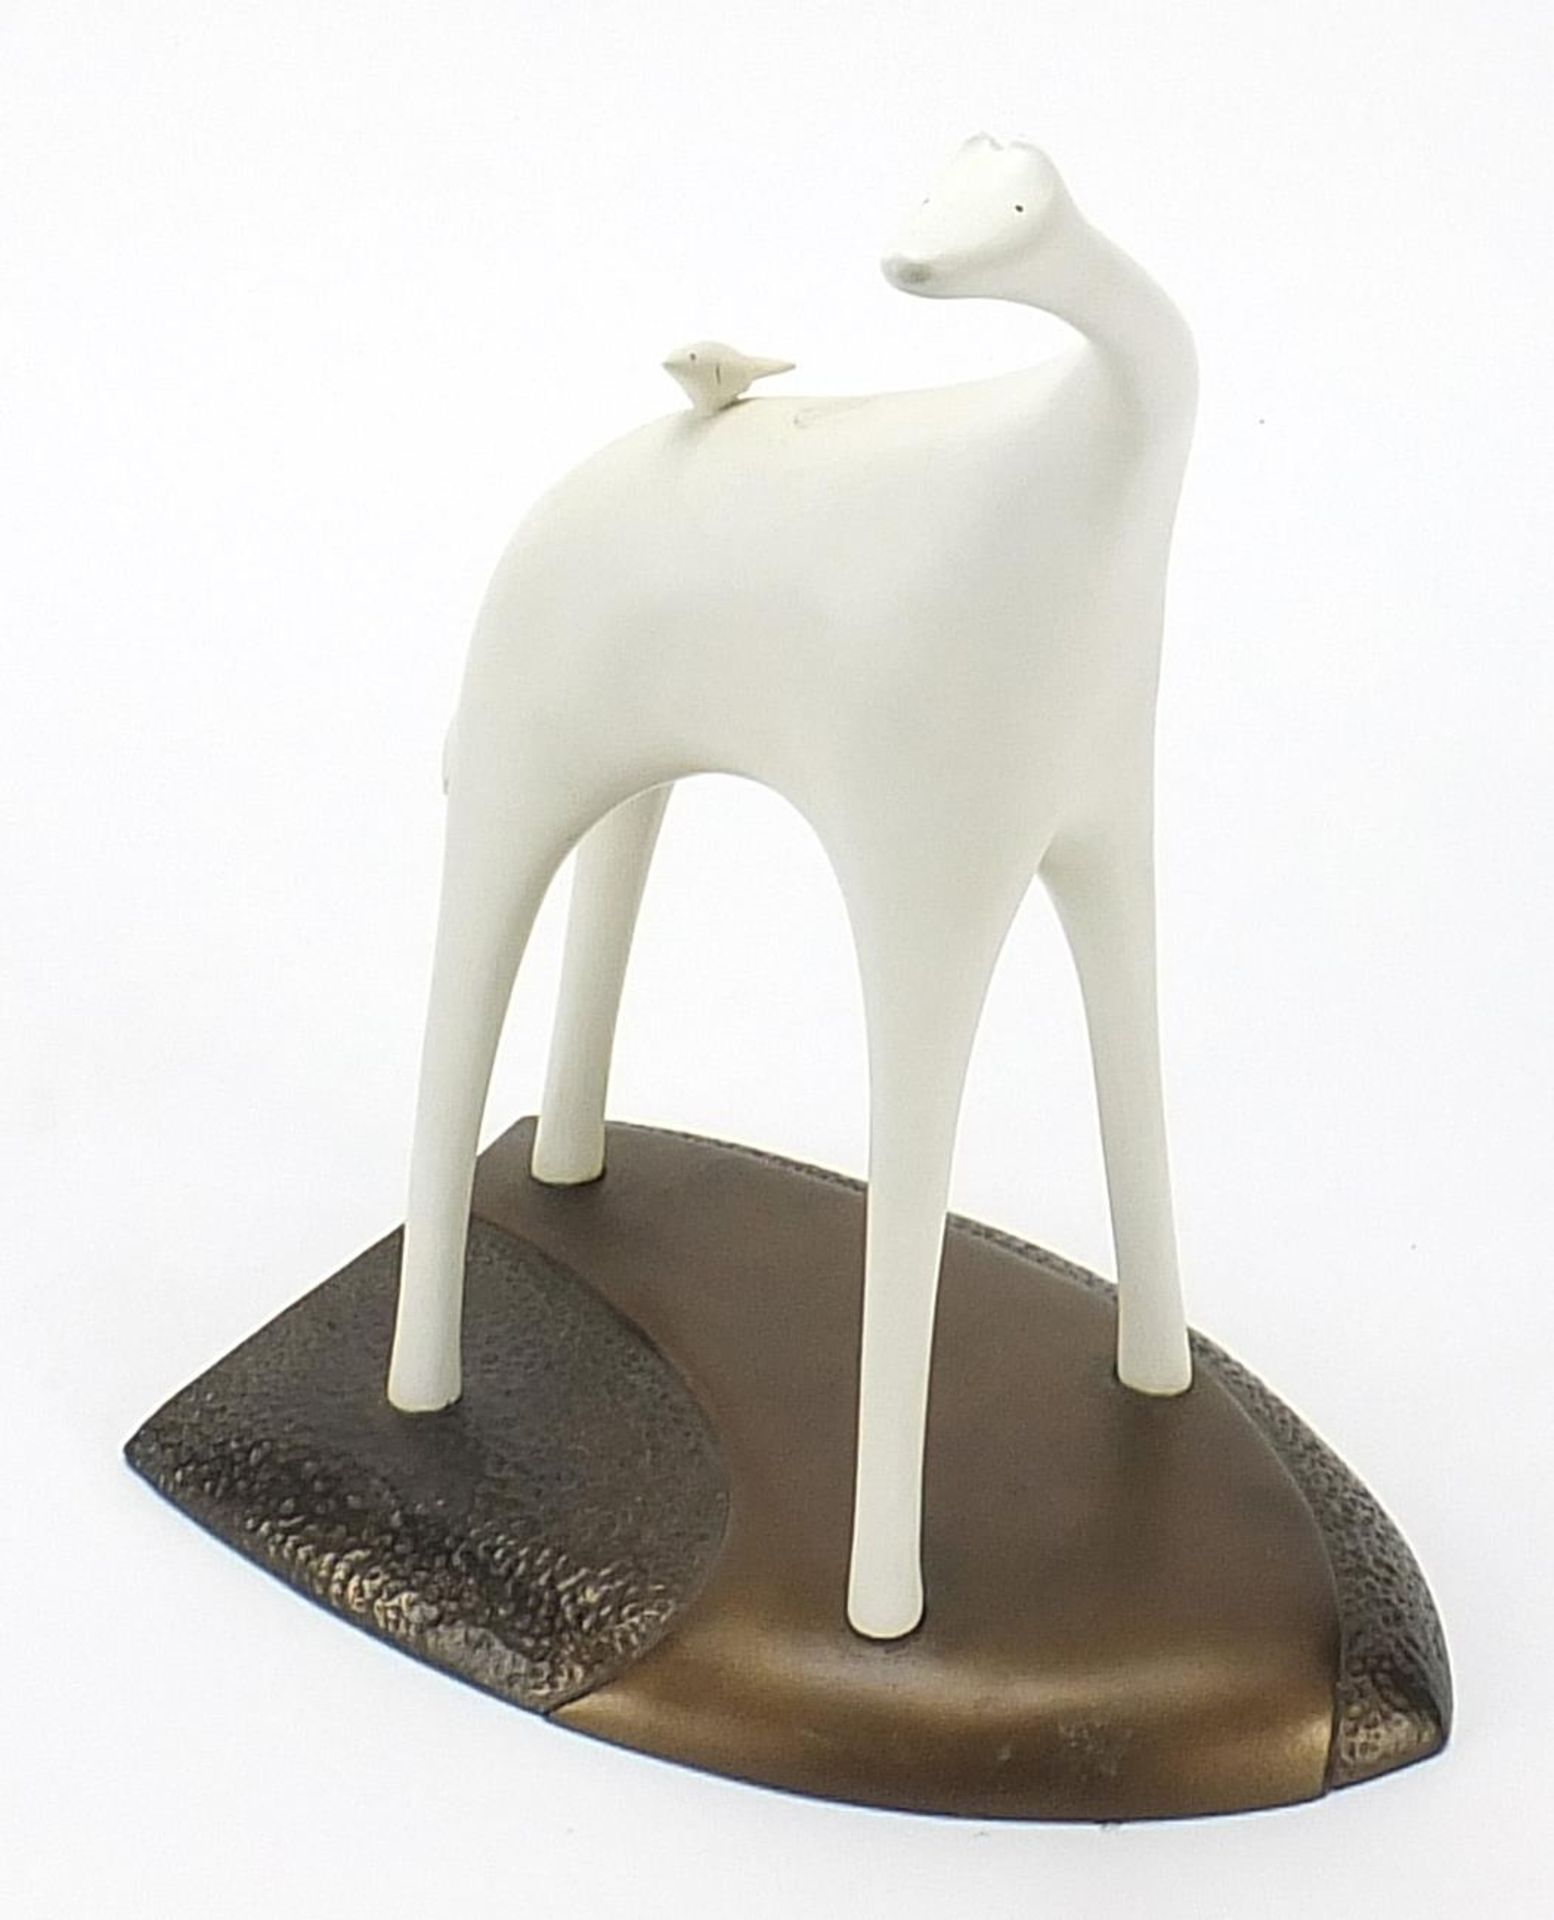 Modernist sculpture of a stylised giraffe and bird raised on a shaped bronzed base, limited